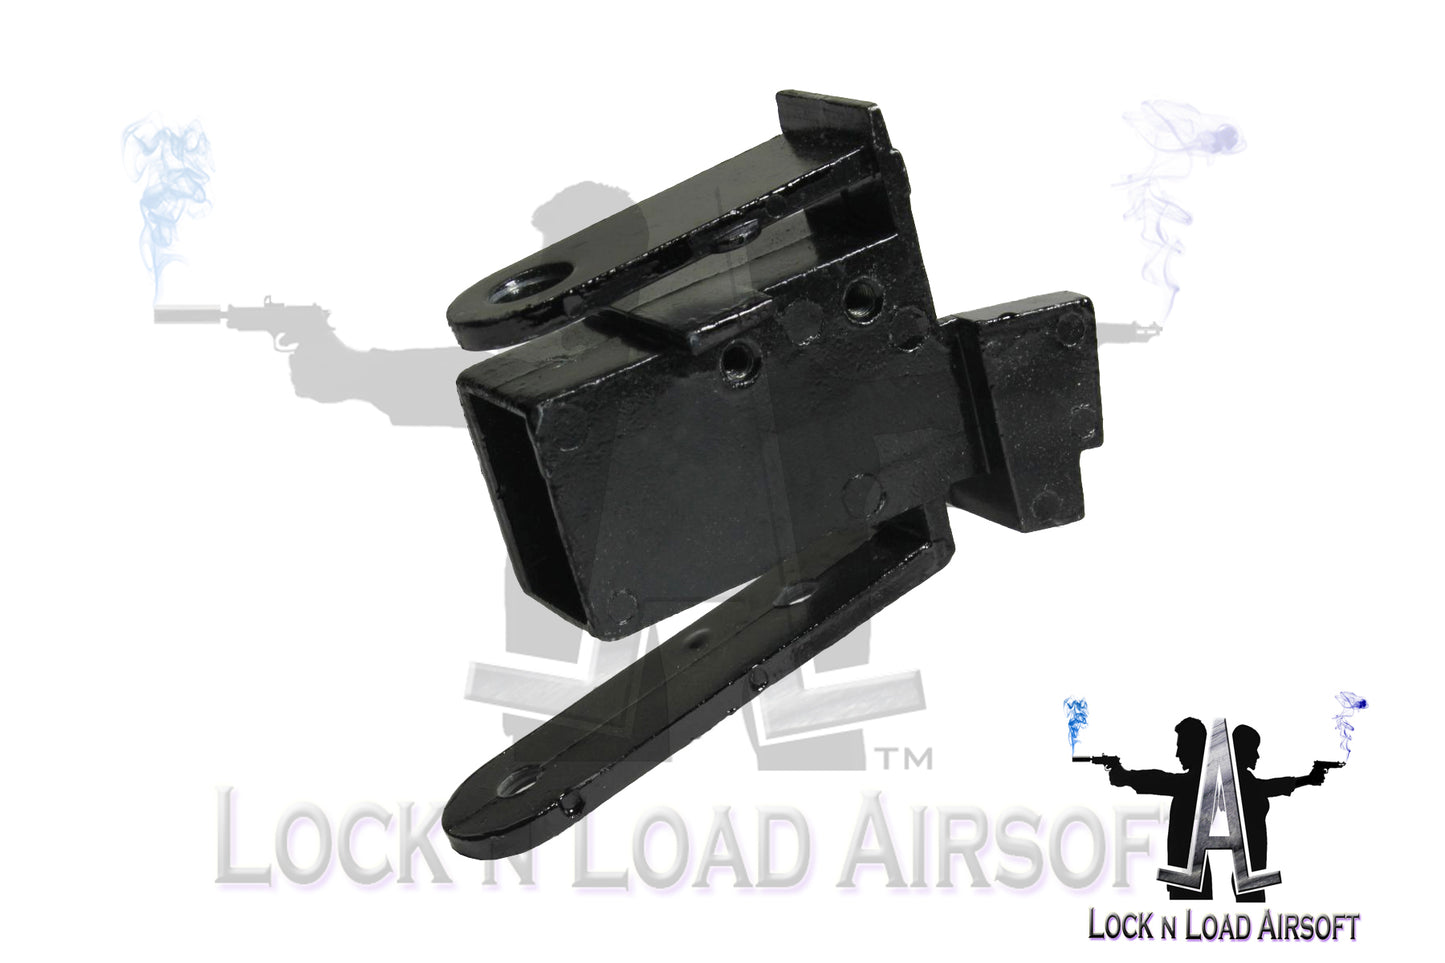 Full Metal AK Lower Receiver Stock Connection Mount Replacement | Conversion